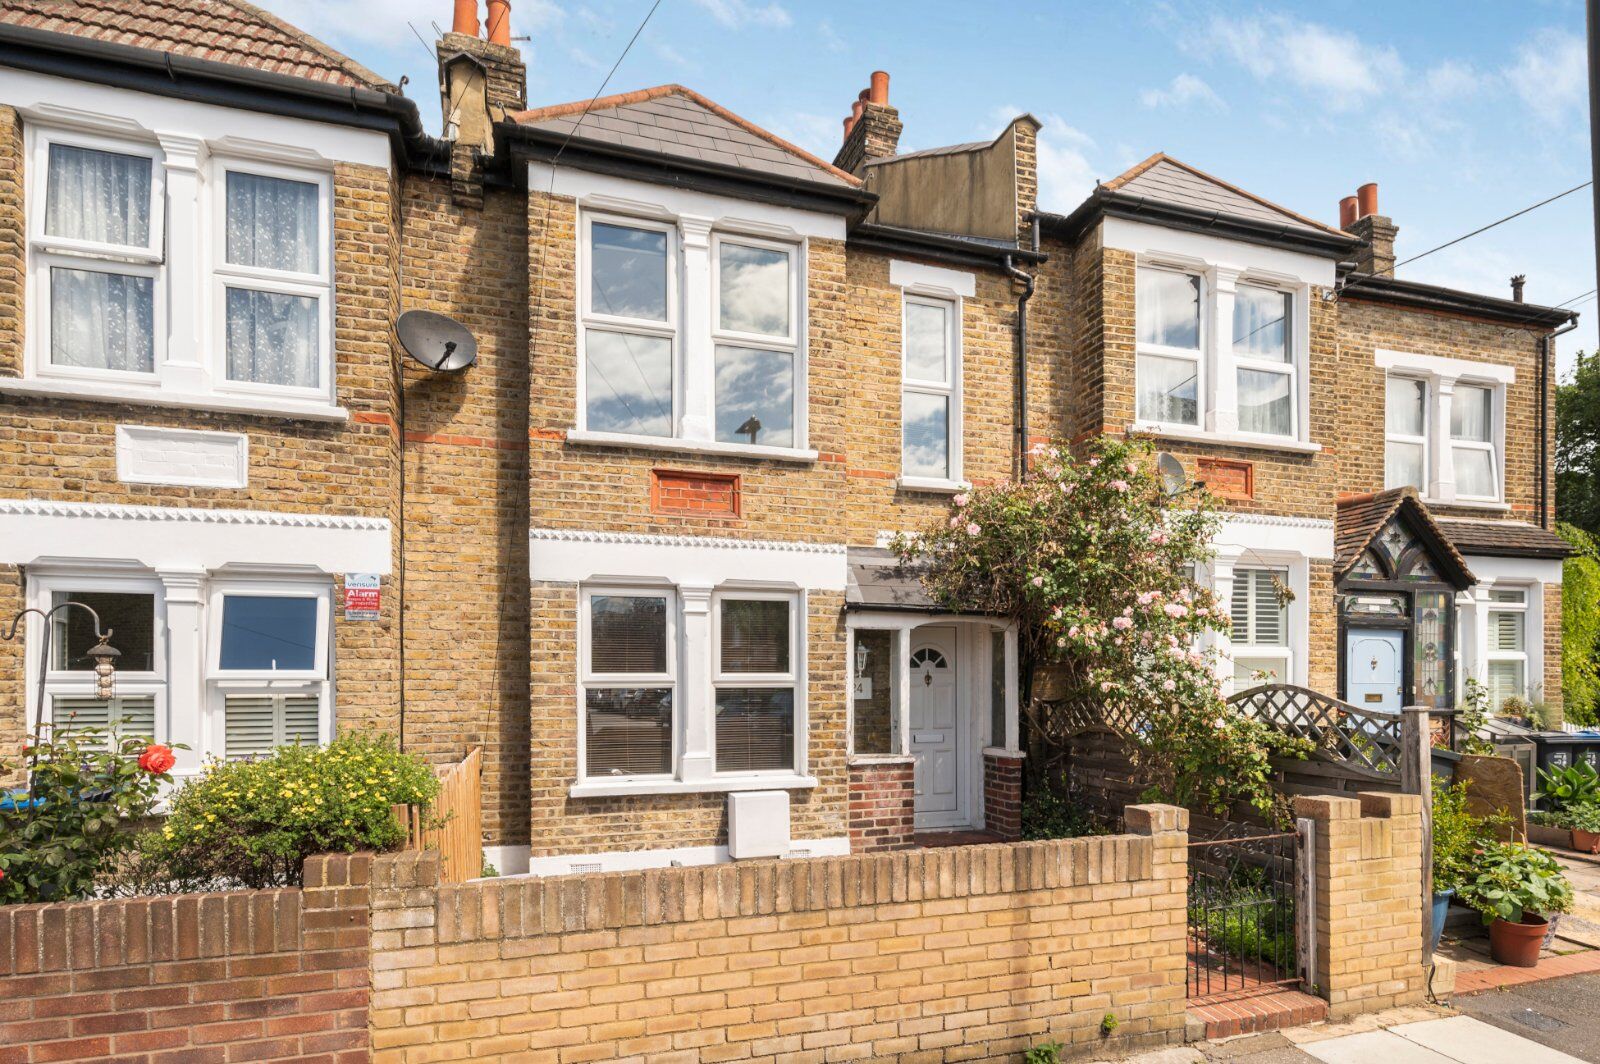 3 bedroom mid terraced house for sale Cecil Road, Wimbledon, SW19, main image